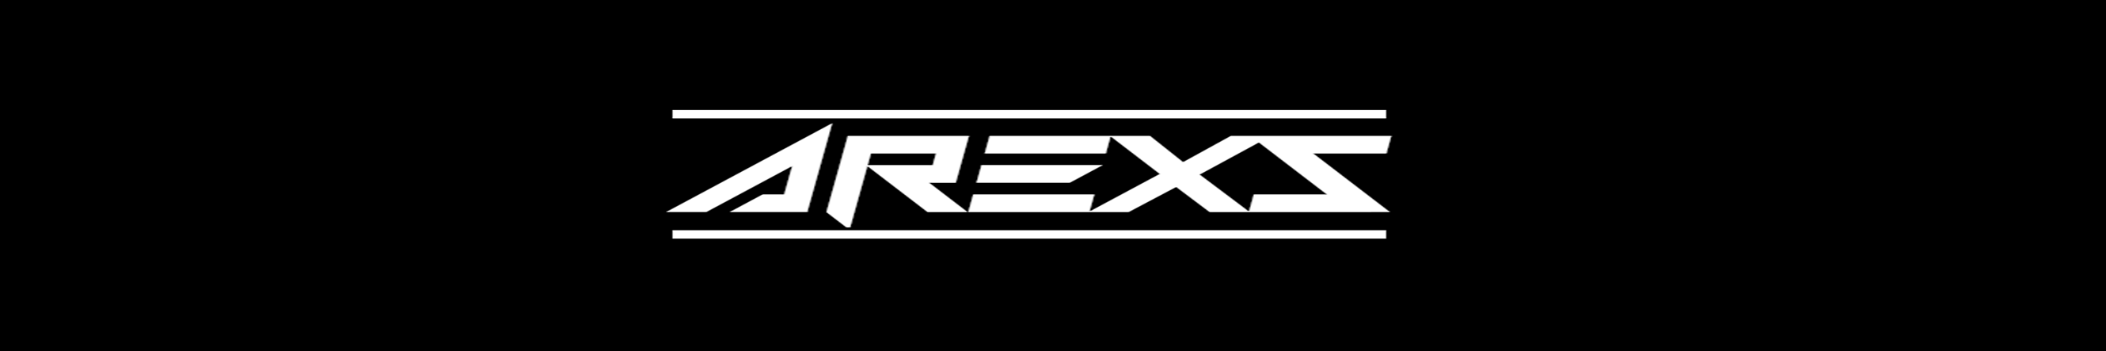 Arexs Official